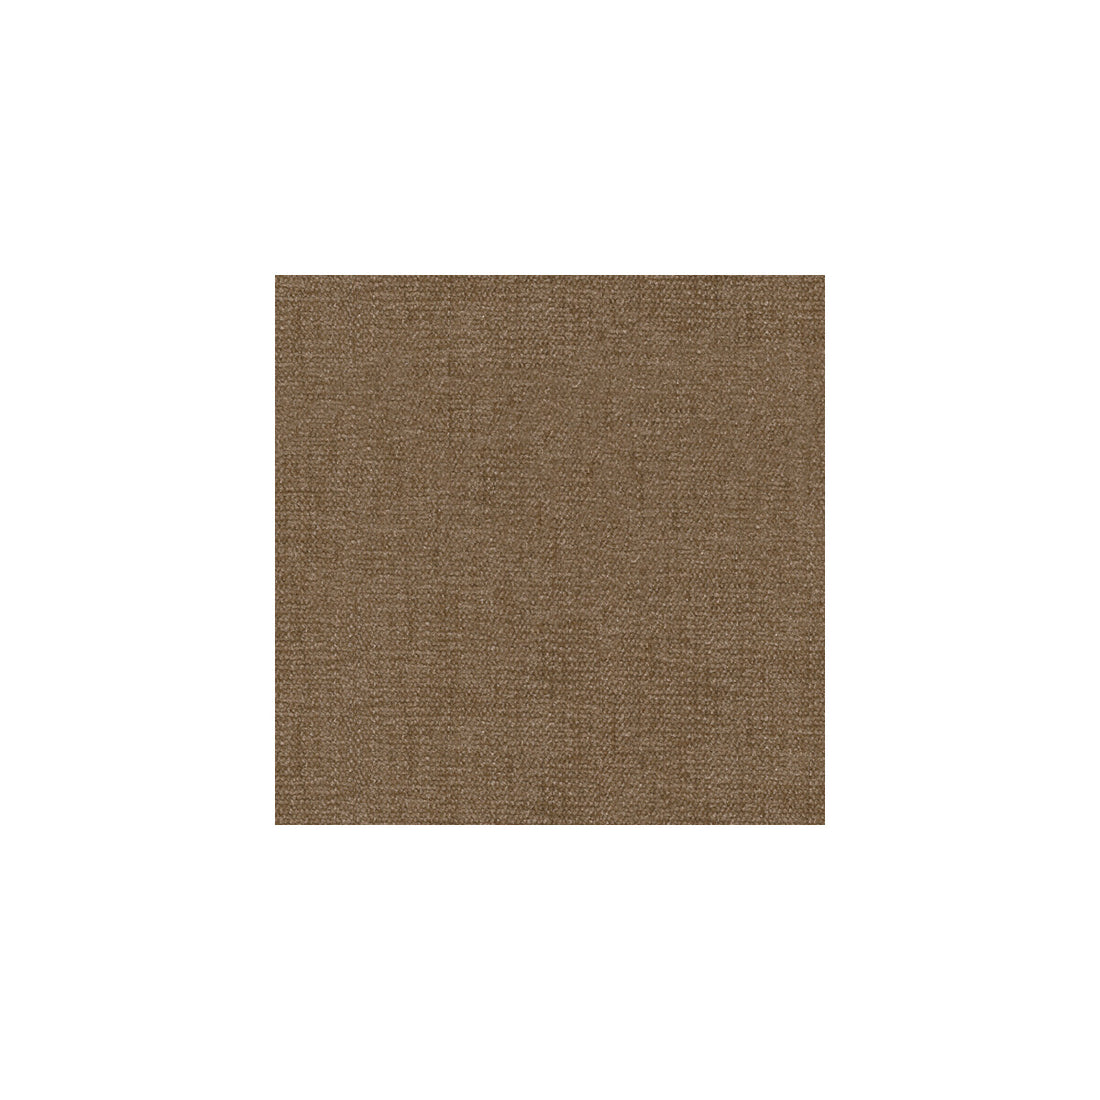 Kravet Contract fabric in 32148-1060 color - pattern 32148.1060.0 - by Kravet Contract